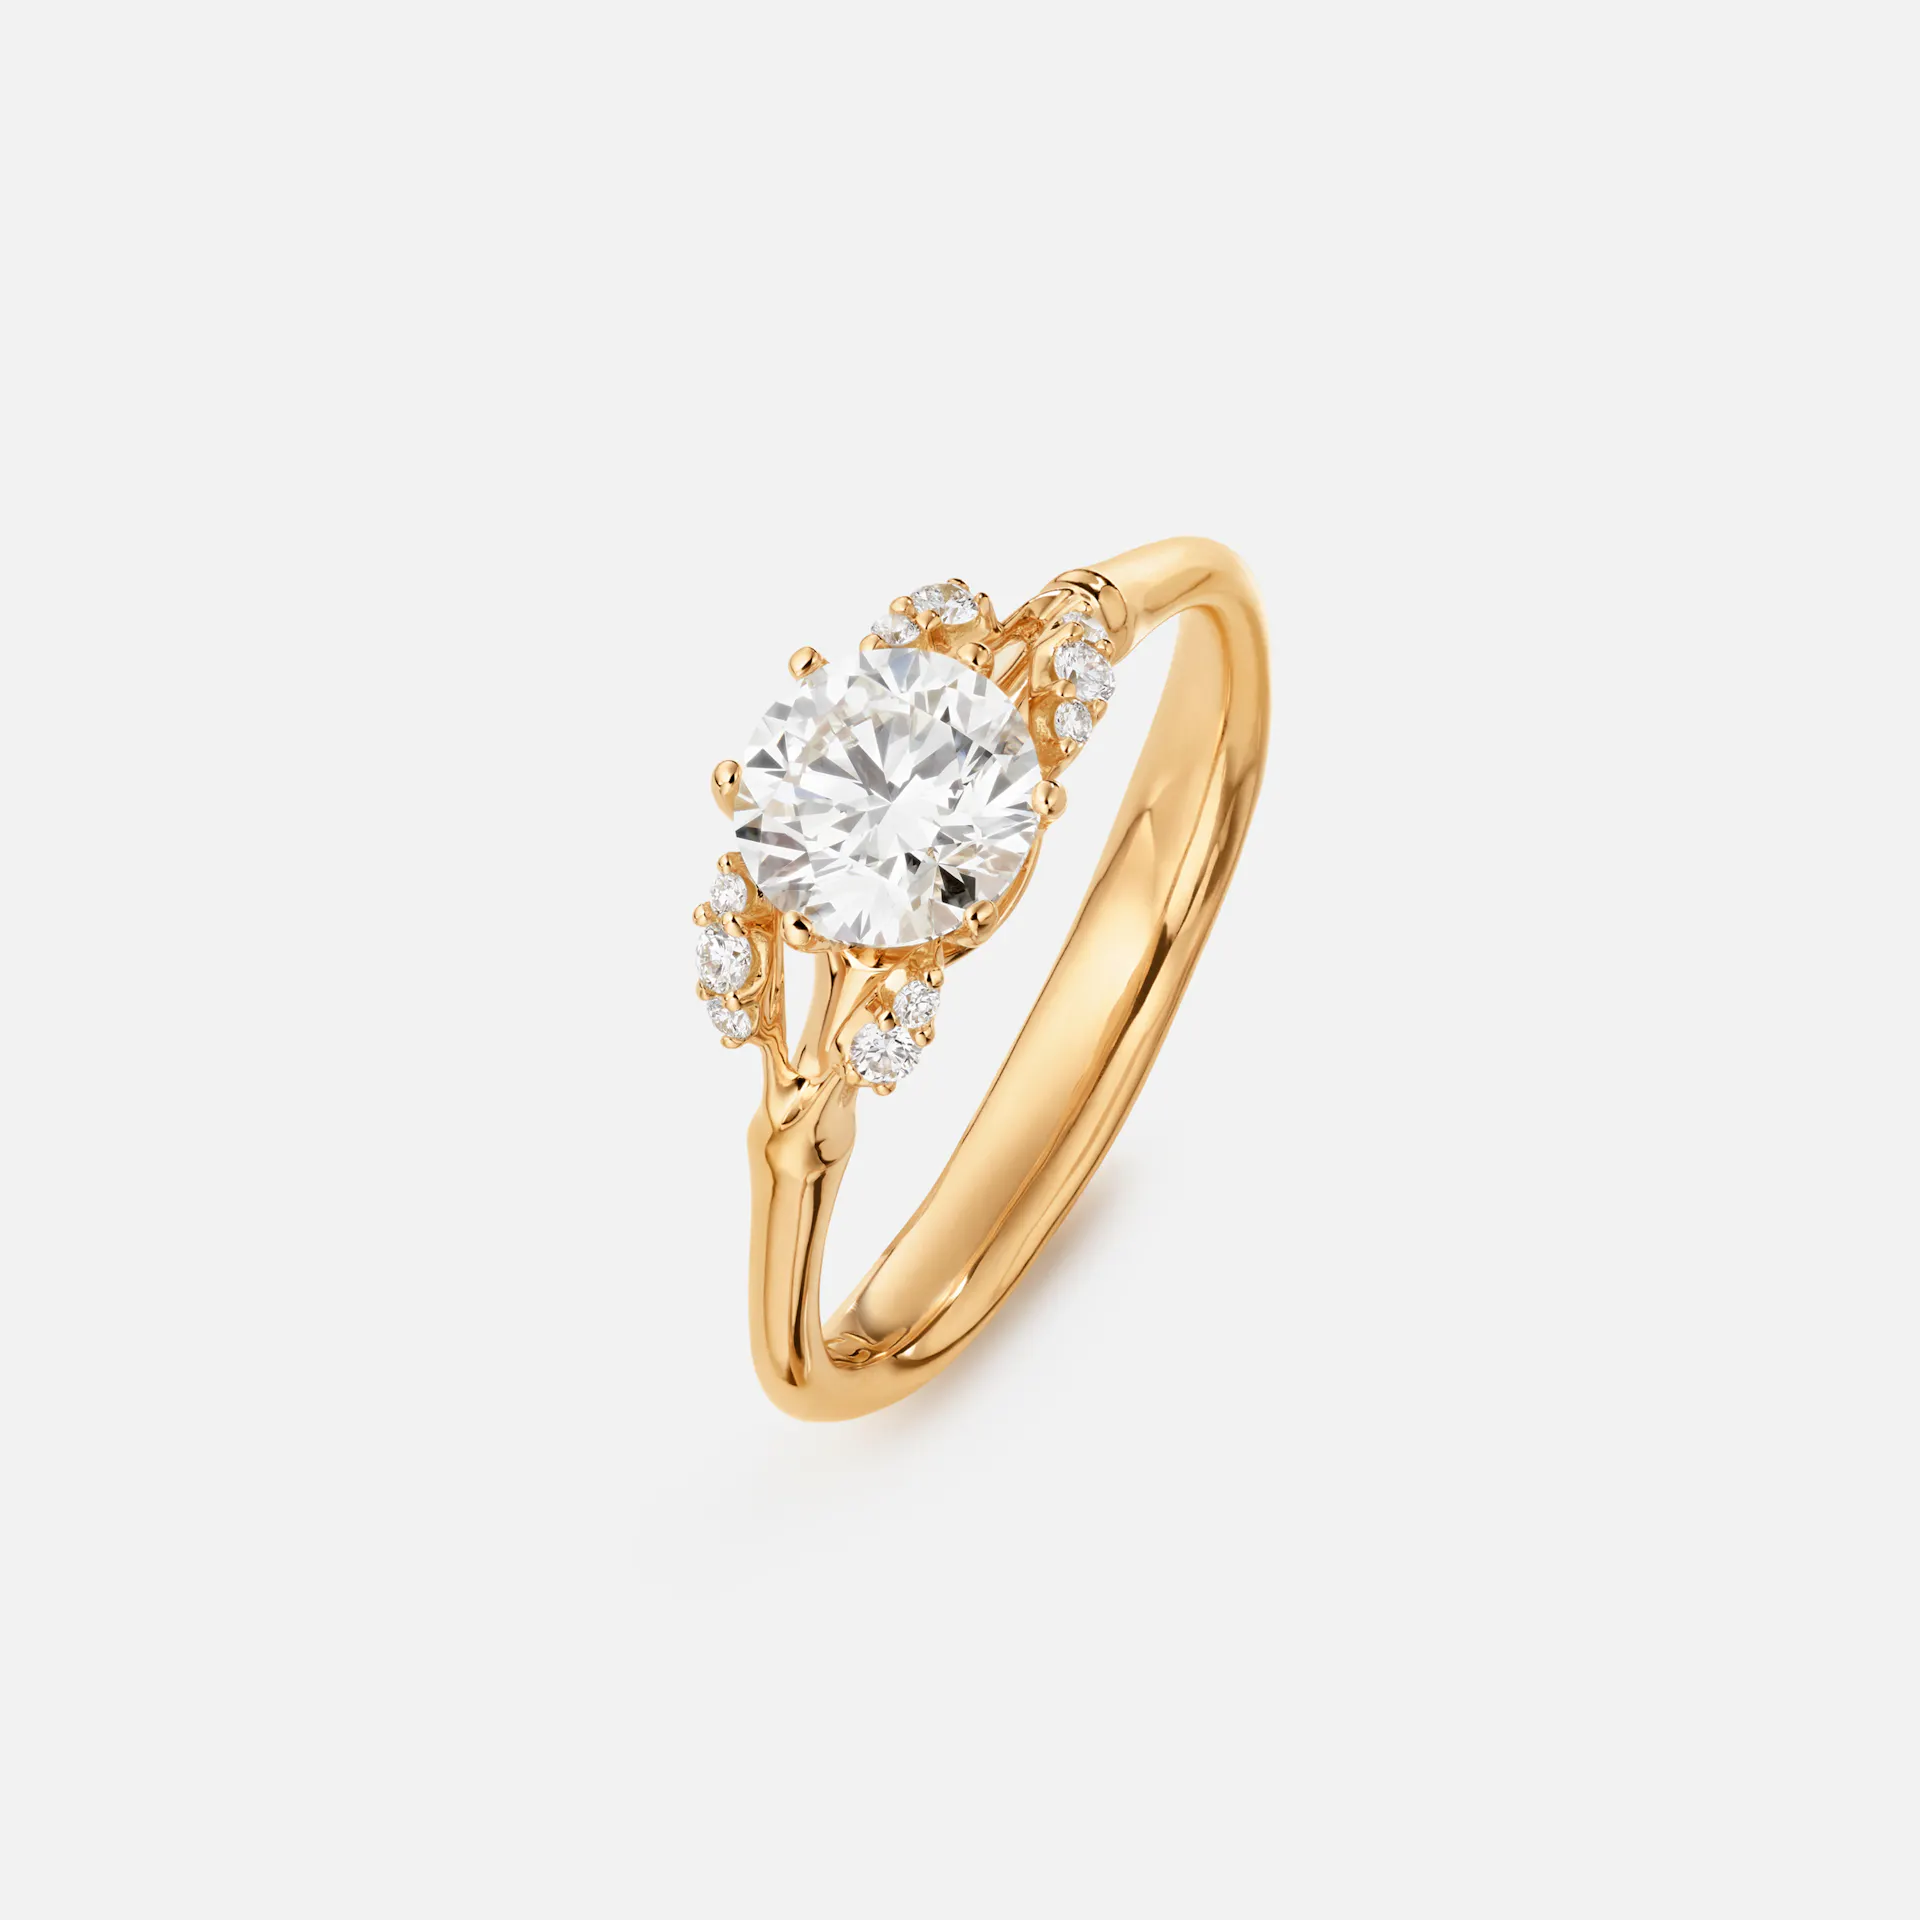 Ole Lynggaard Vinter frost solitaire ring A2781-423 18 kt 55